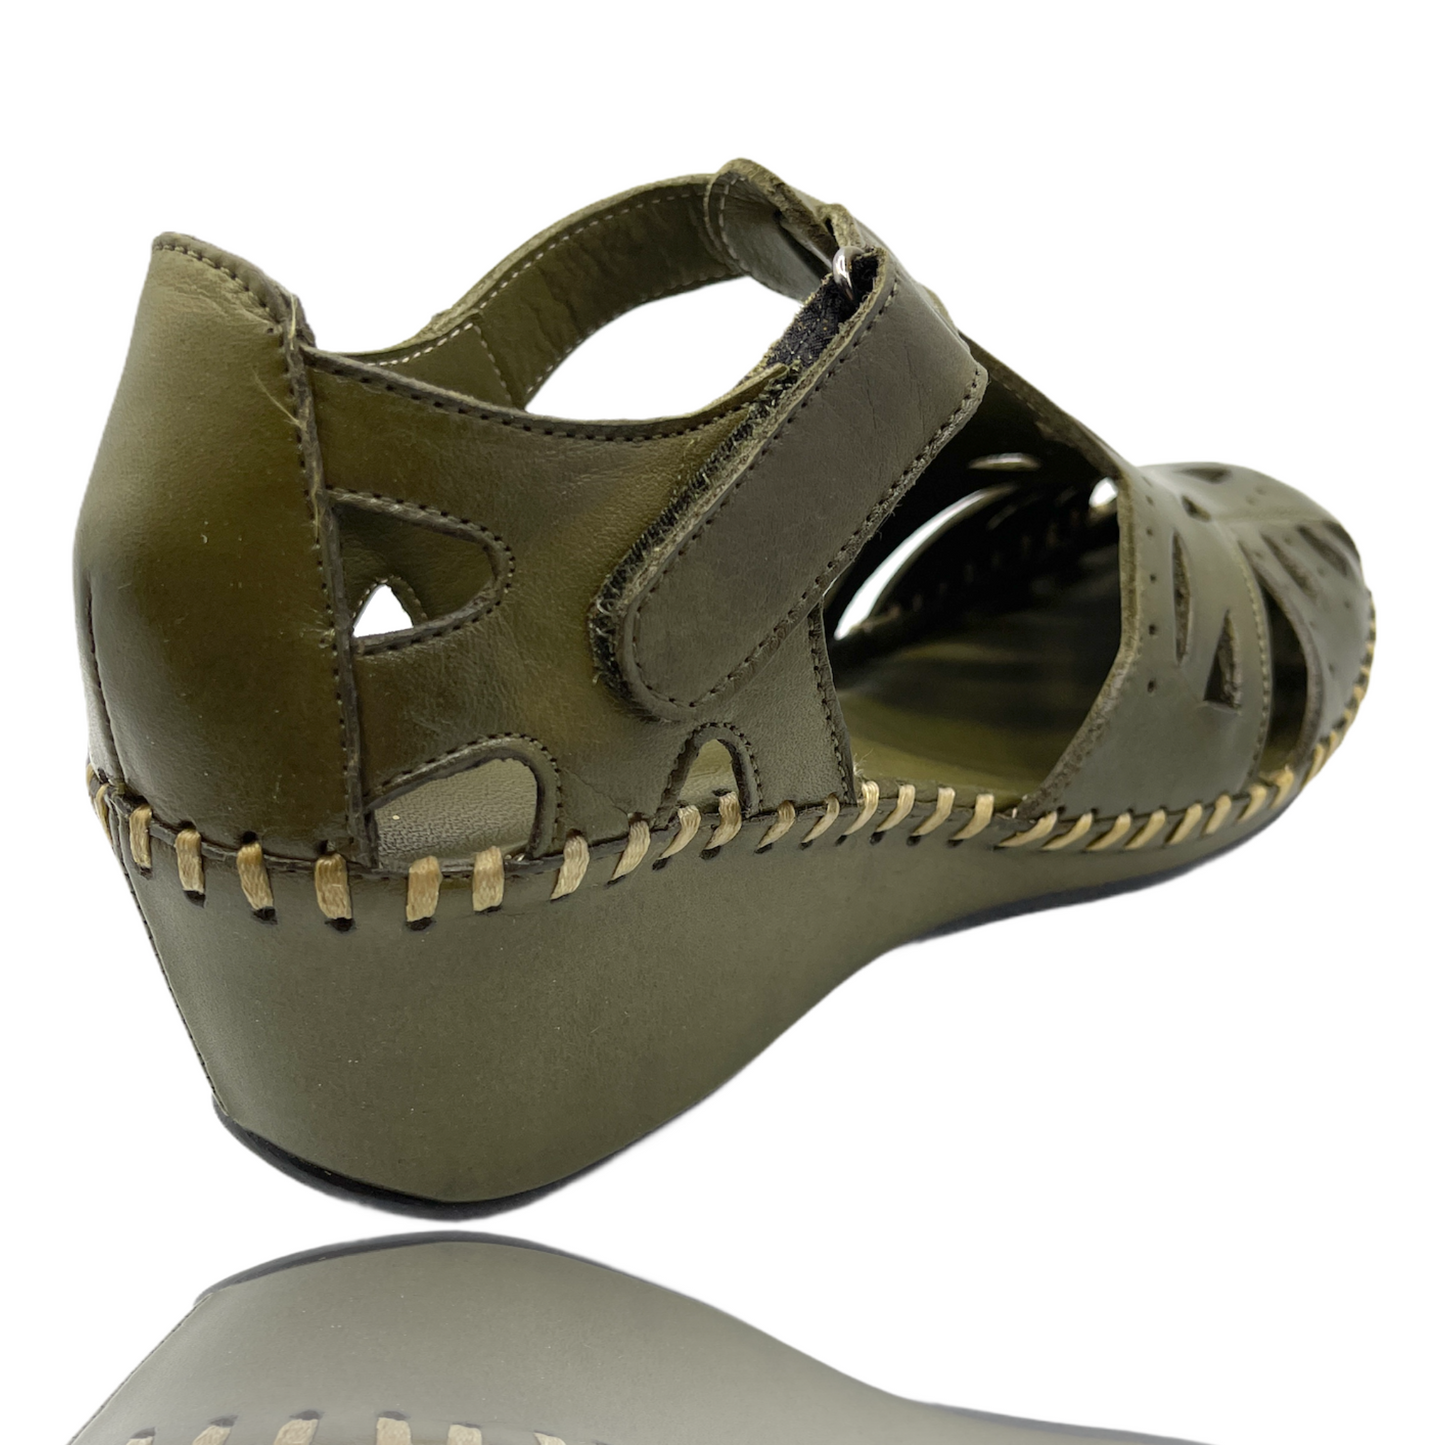 The Tonmawr Green Leather Sandal Final Sale!